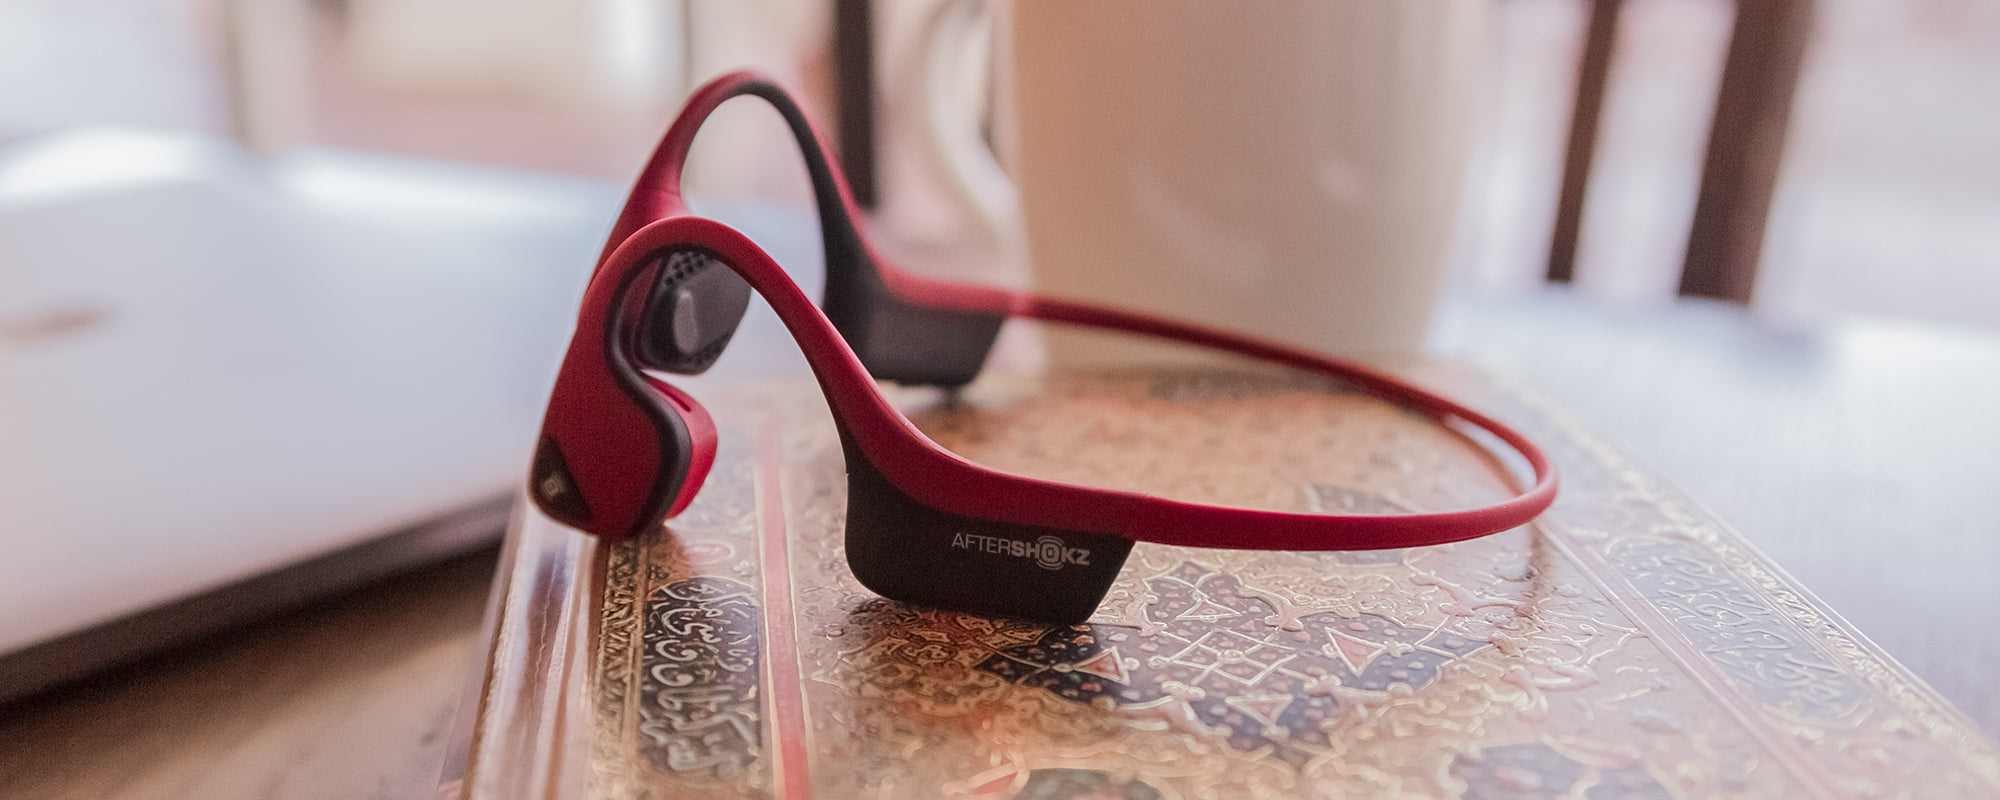 How AfterShokz Can Help You Work From Home